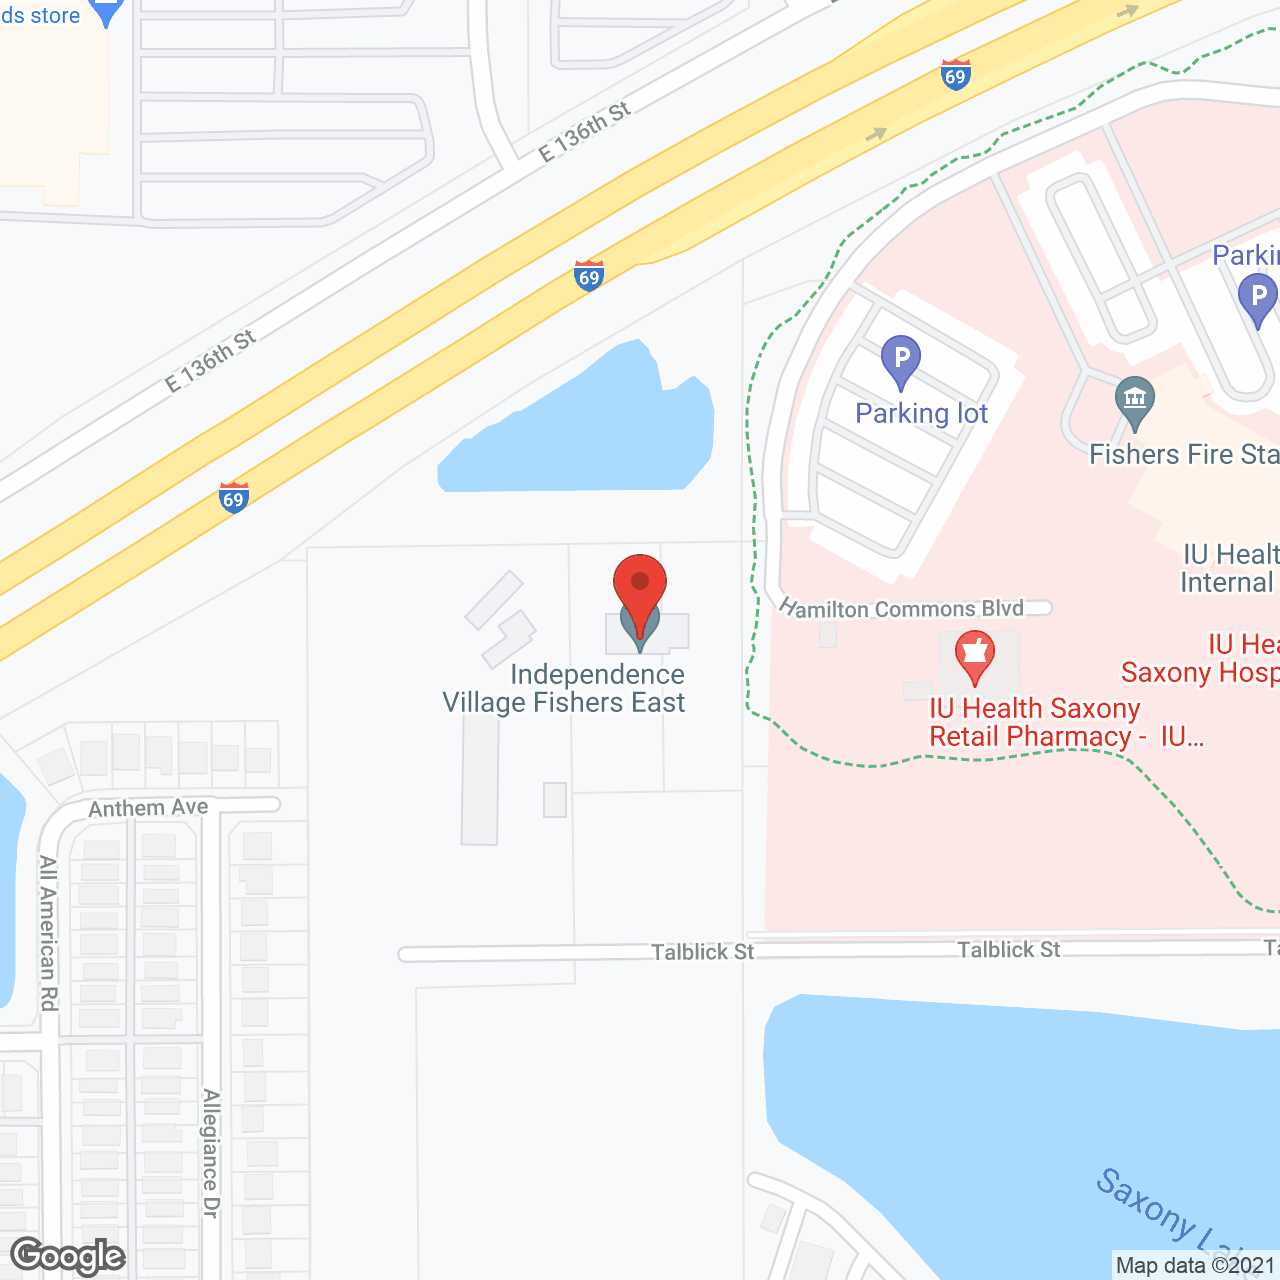 Independence Village of Fishers East in google map